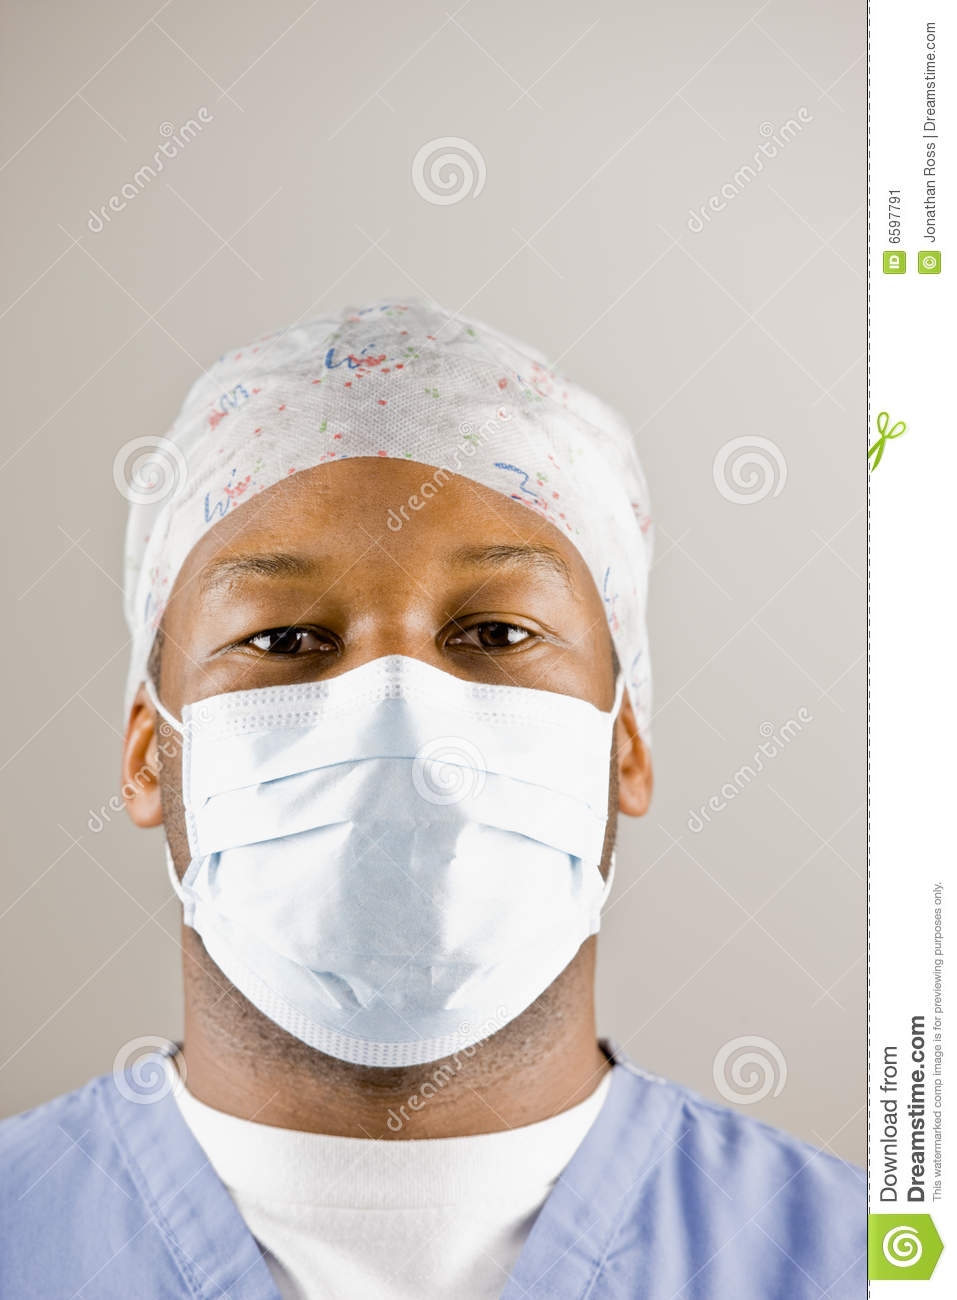 Doctor In Scrubs Surgical Mask And Surgical Cap Stock Image   Image    